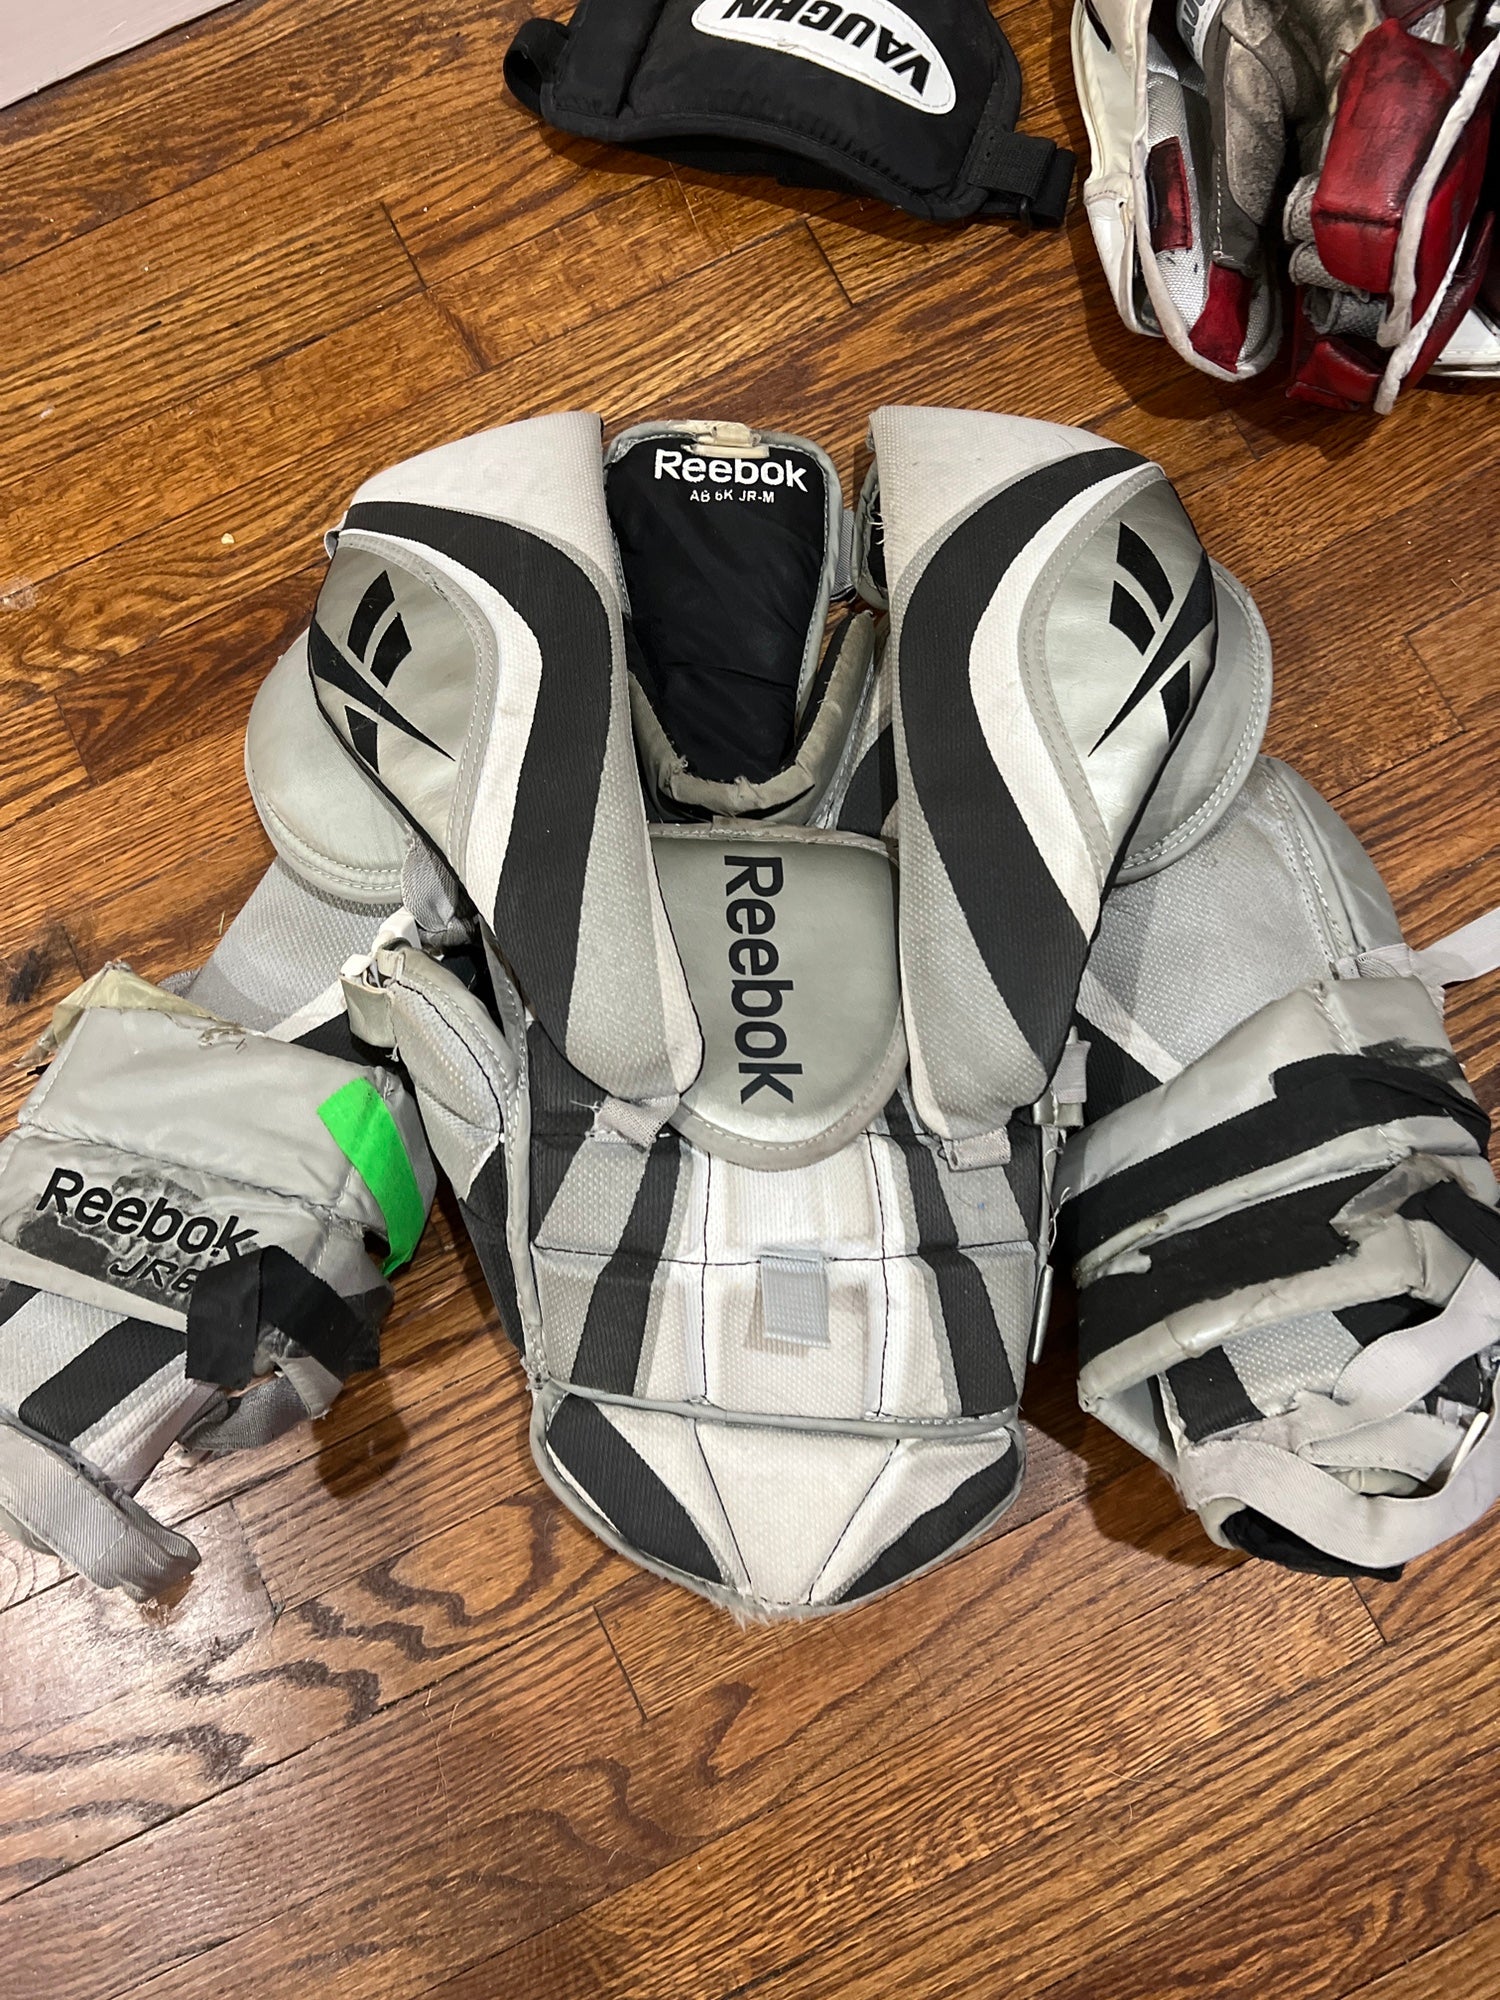 Reebok goalie chest protector, AB 6 youth large, good shape. - Team sports